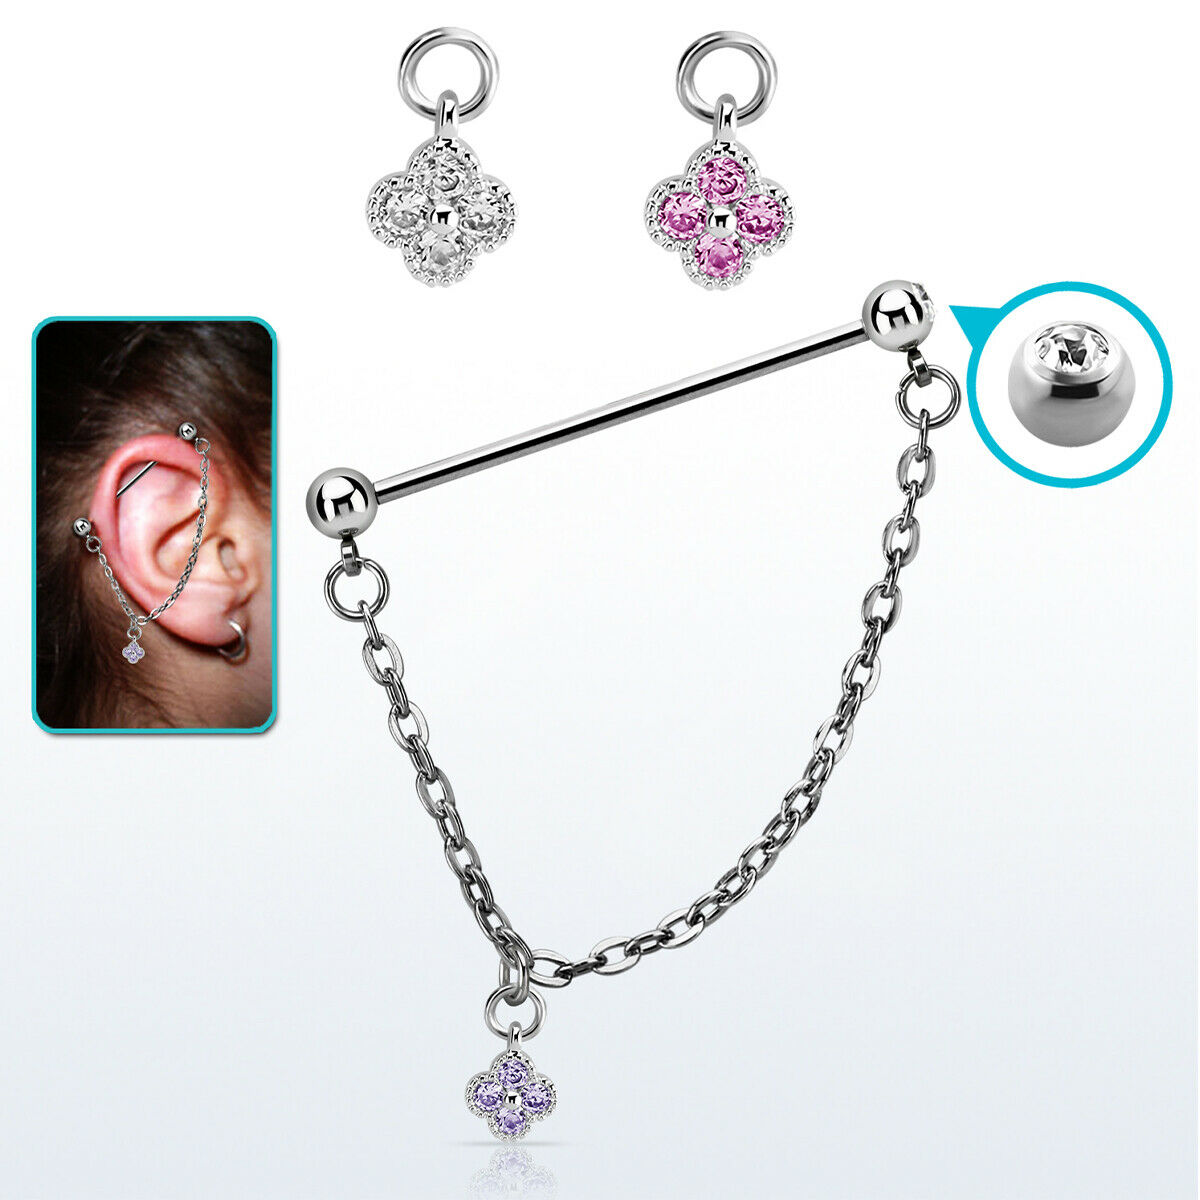 Ear industrial barbell 14g/1.6mm with a 5mm press fit gem ball and a 5mm steel ball linked with a chain with cubic zirconia stones in a flower shape dangling part